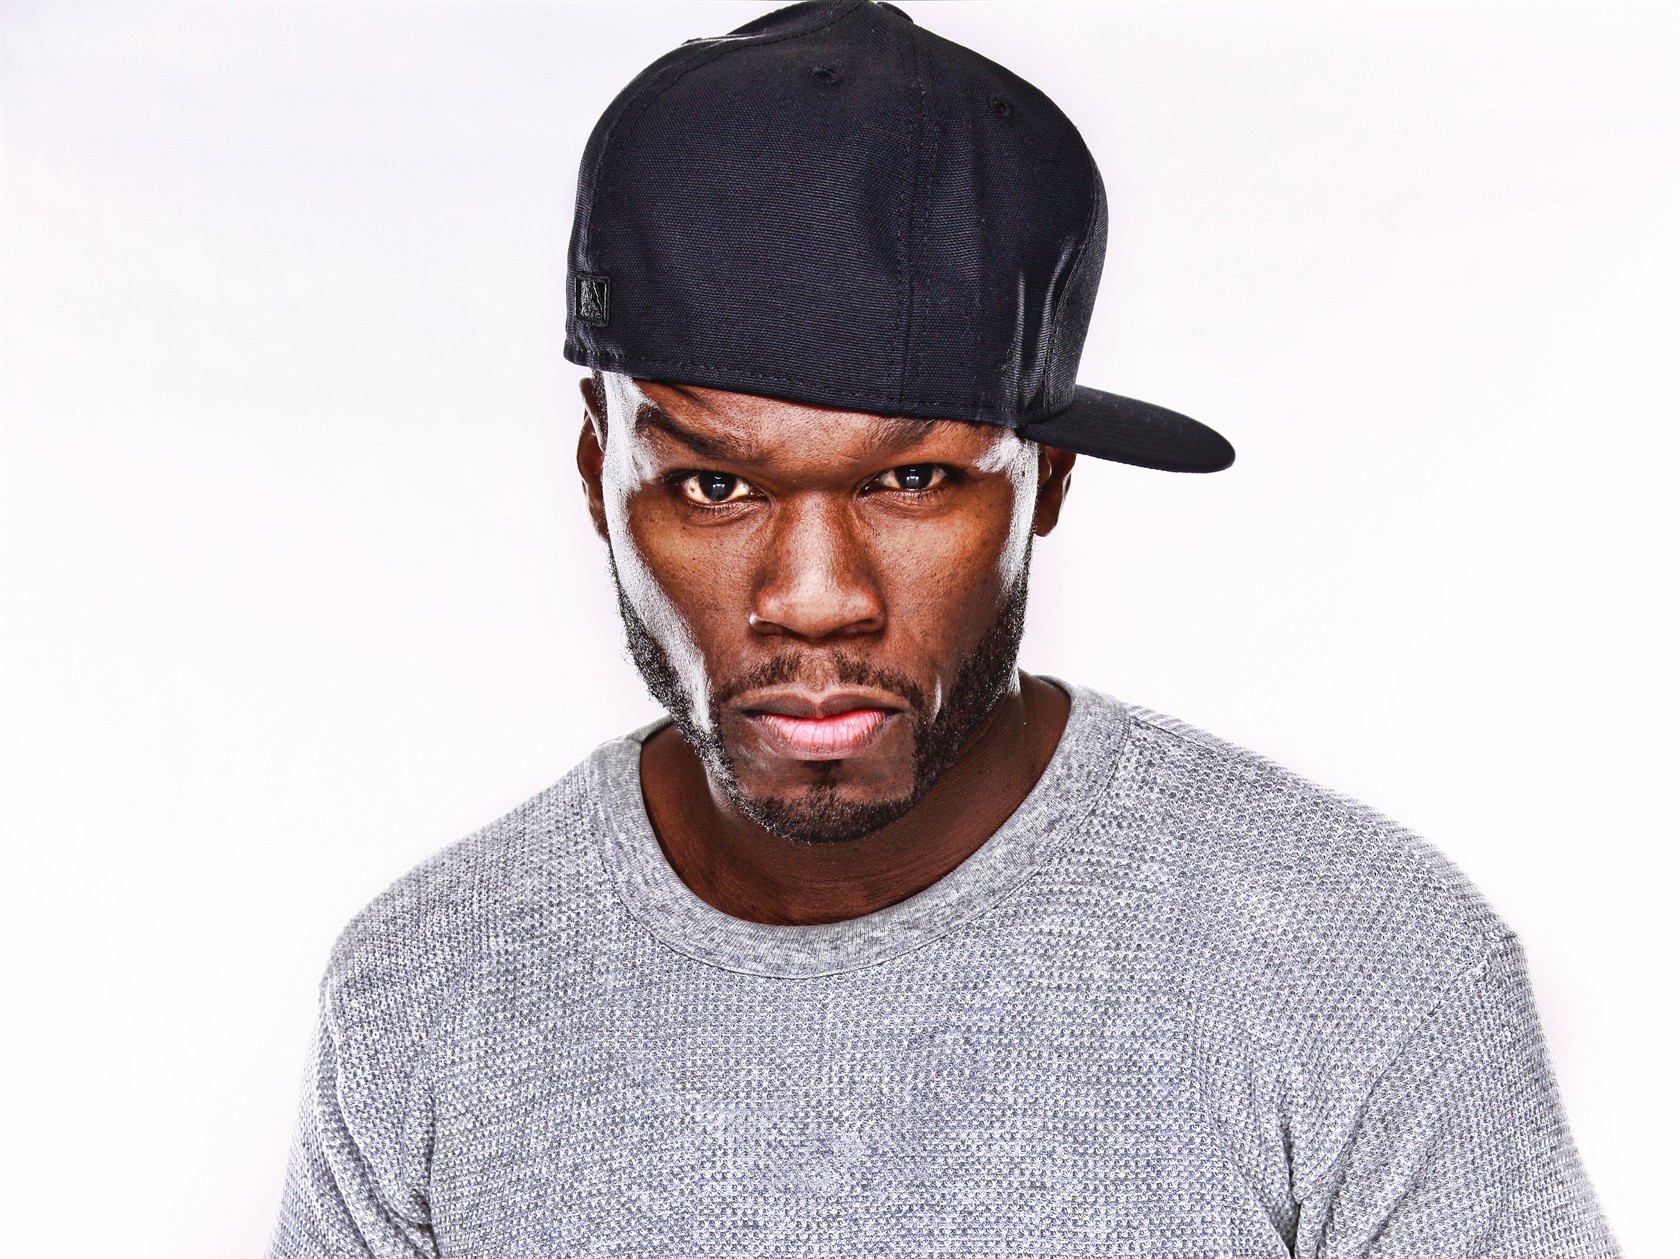 Amazing 50 Cent Pictures & Backgrounds